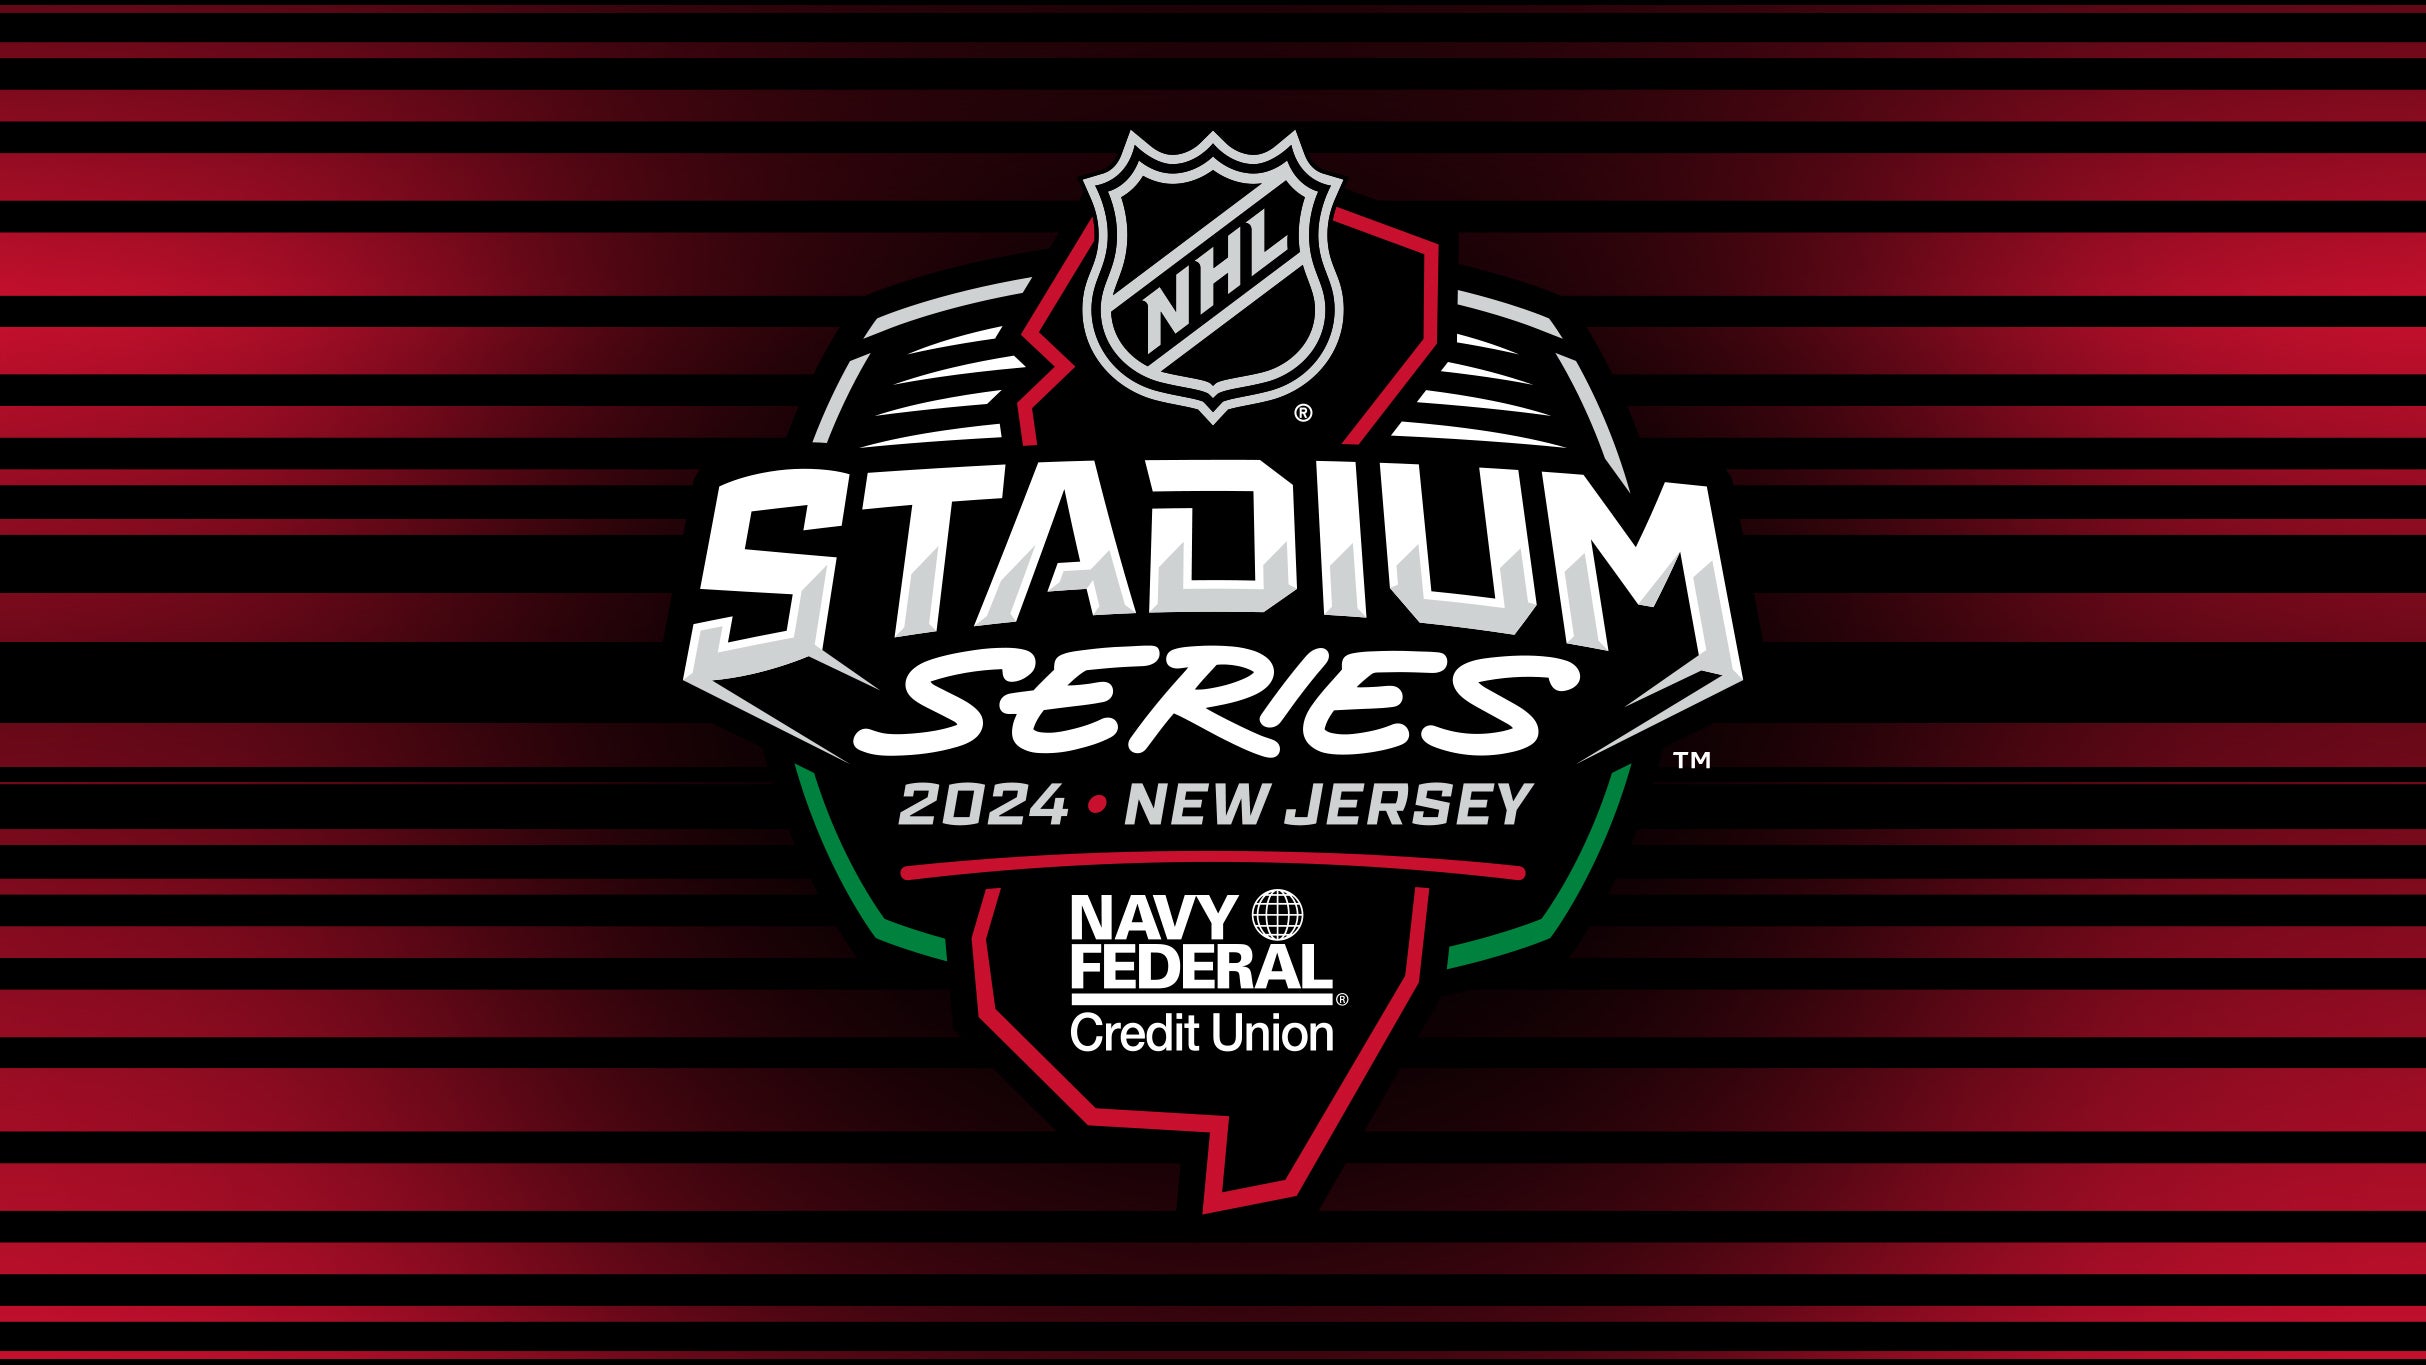 2024 Navy Federal NHL Stadium Series- PHI v NJD w/ Jonas Brothers in East Rutherford promo photo for NHL Stadium Series presale offer code